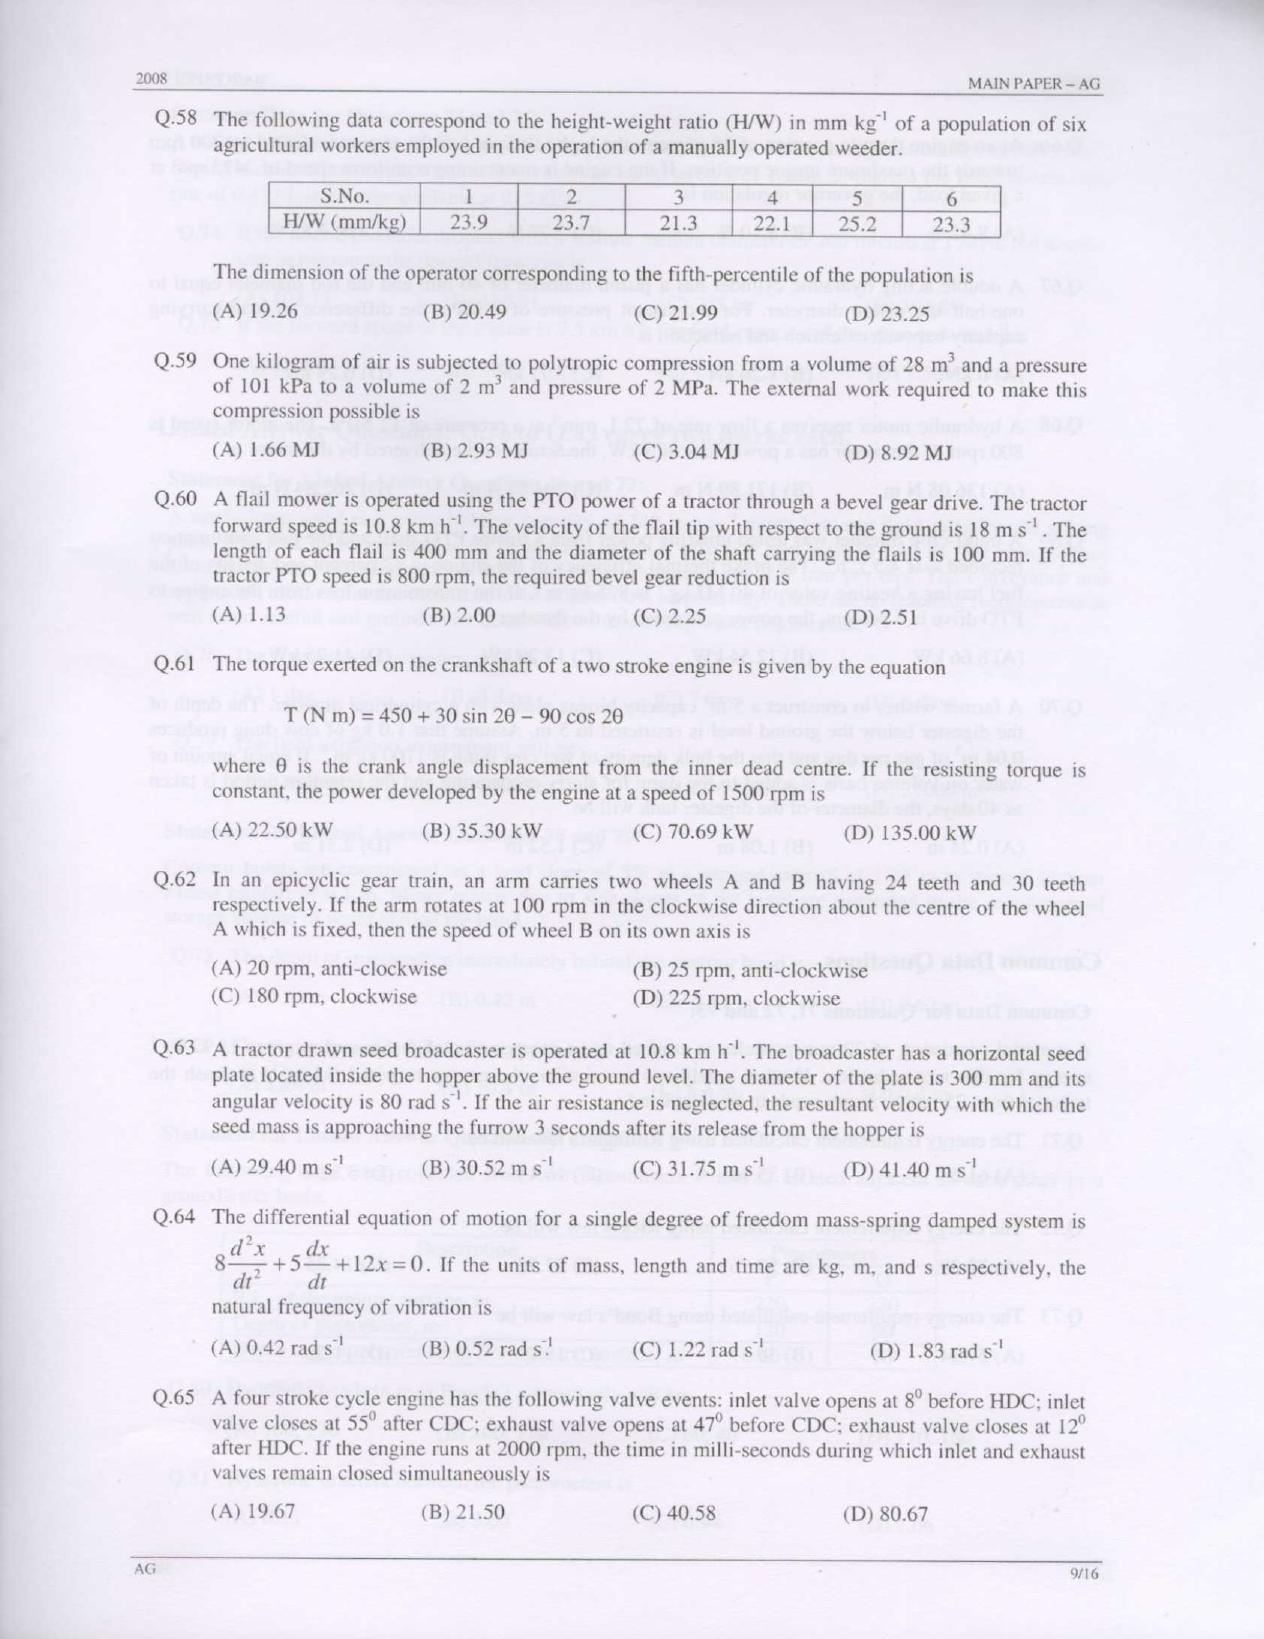 GATE 2008 Agricultural Engineering (AG) Question Paper with Answer Key - Page 9